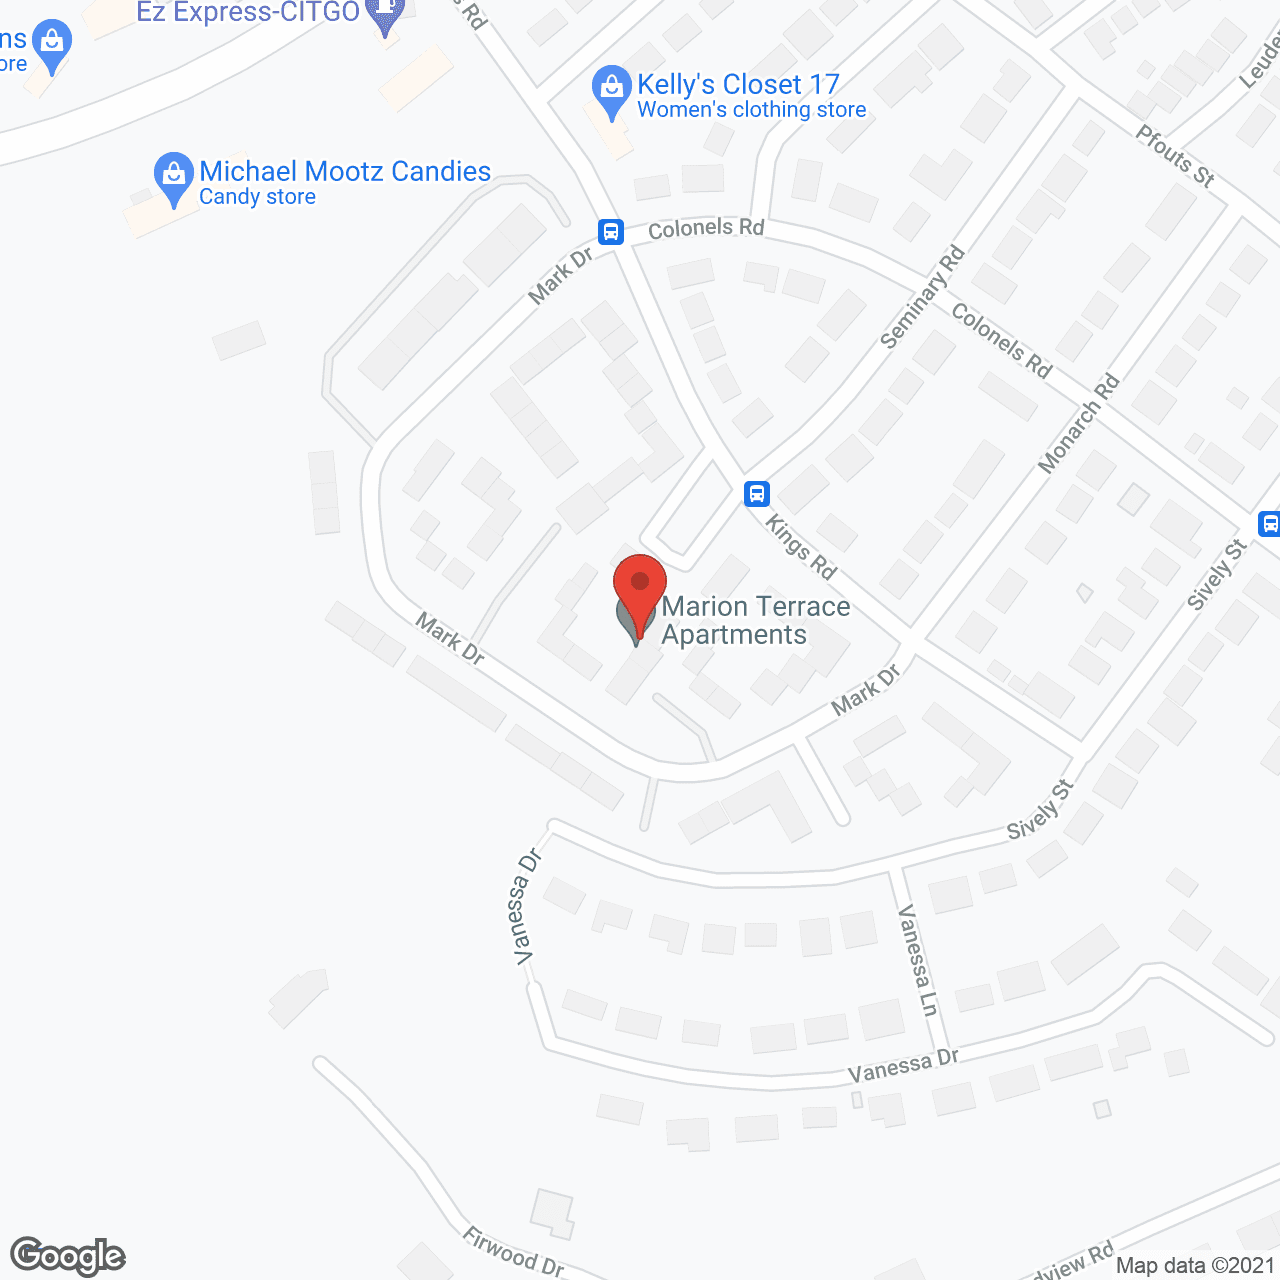 Marion Terrace Apartments in google map